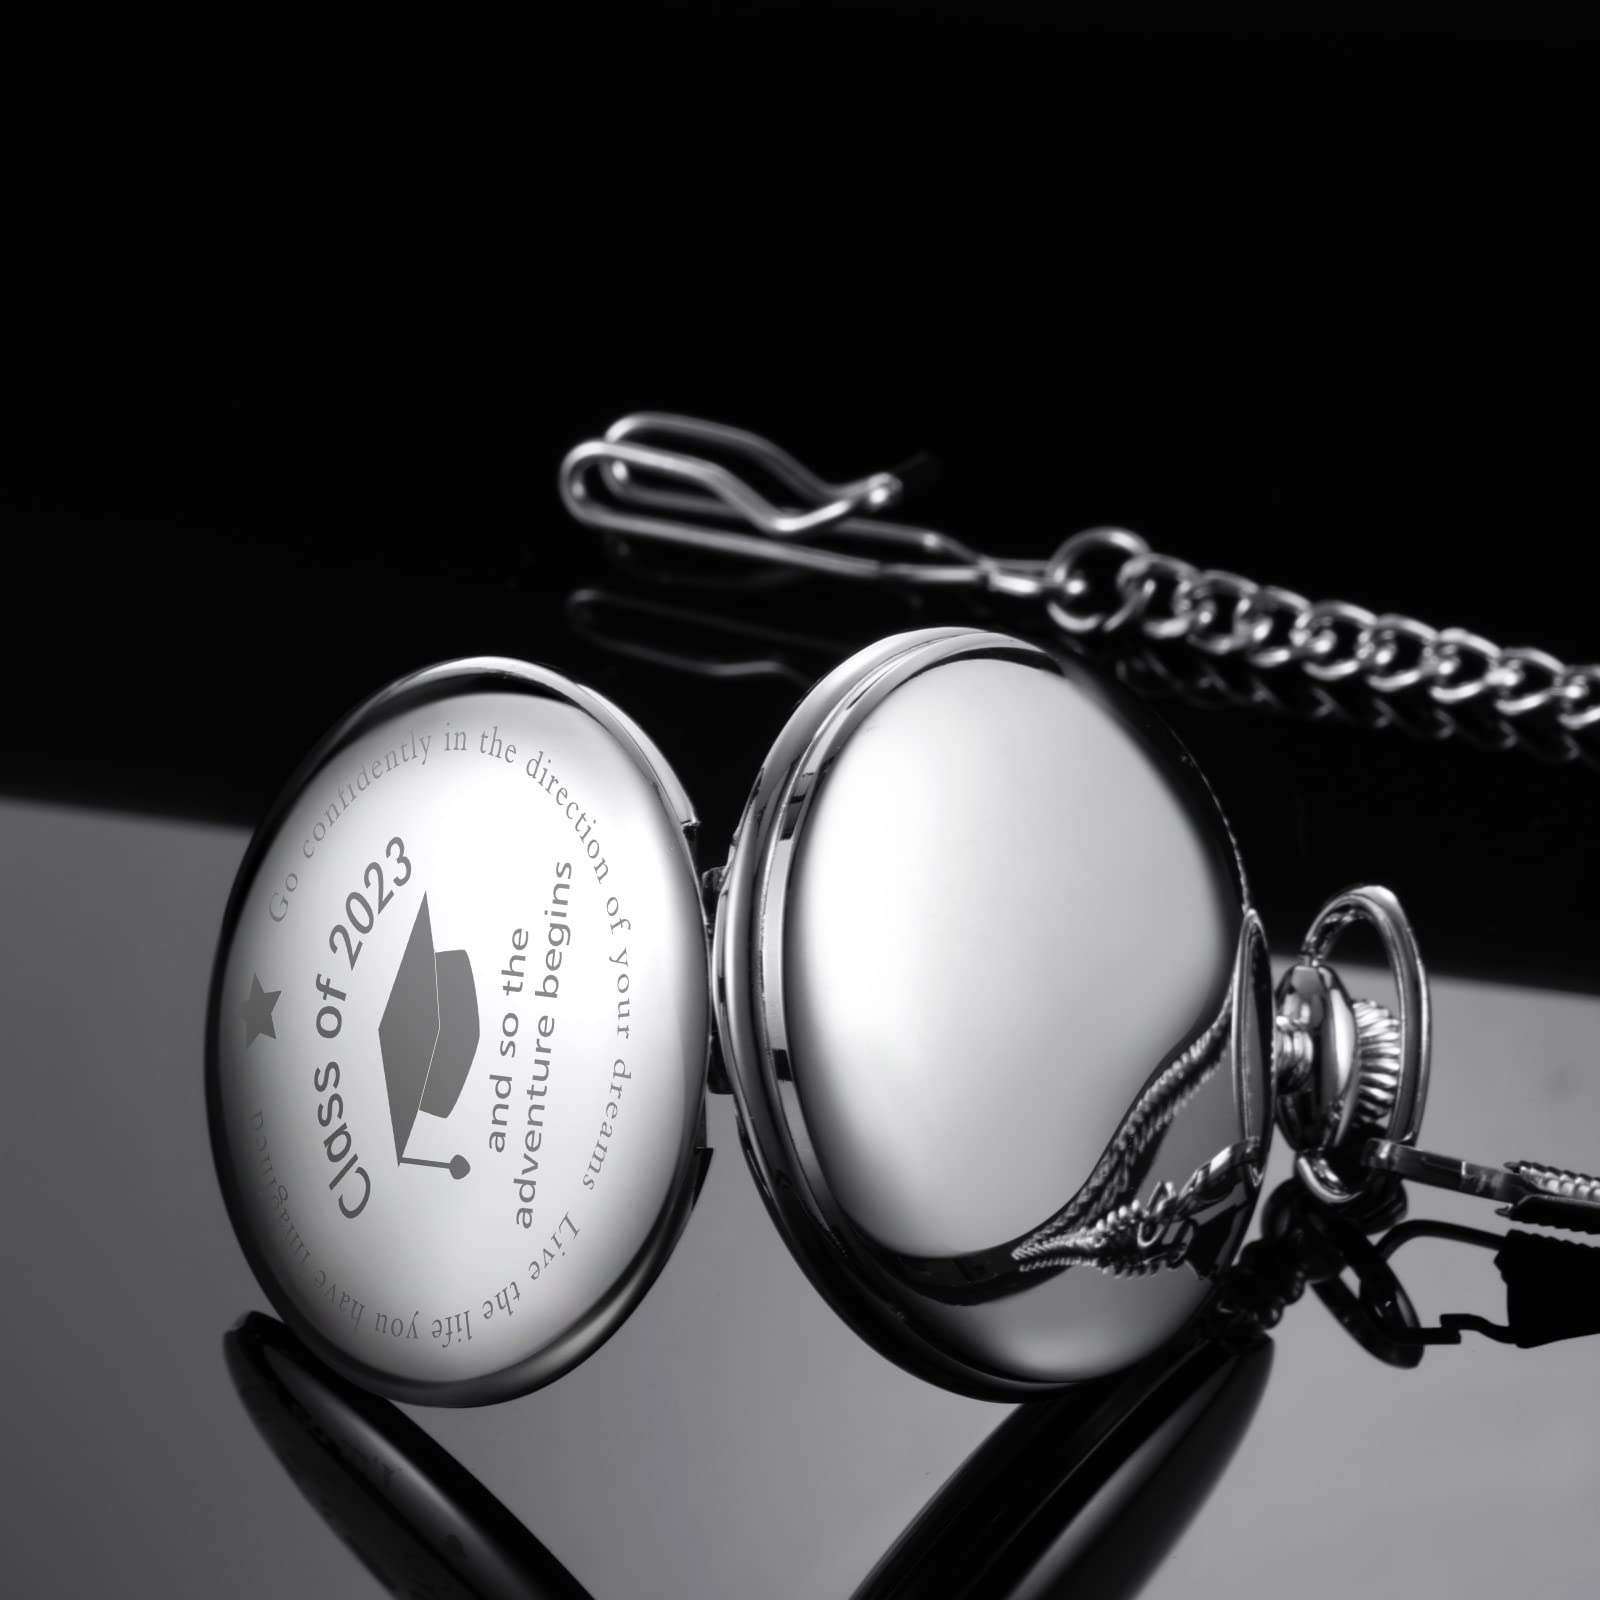 2 Pieces Class of 2023 Pocket Watch Graduation Gift So The Adventure Begins Graduation Gift with Storage Box and Chain for College High School Graduation